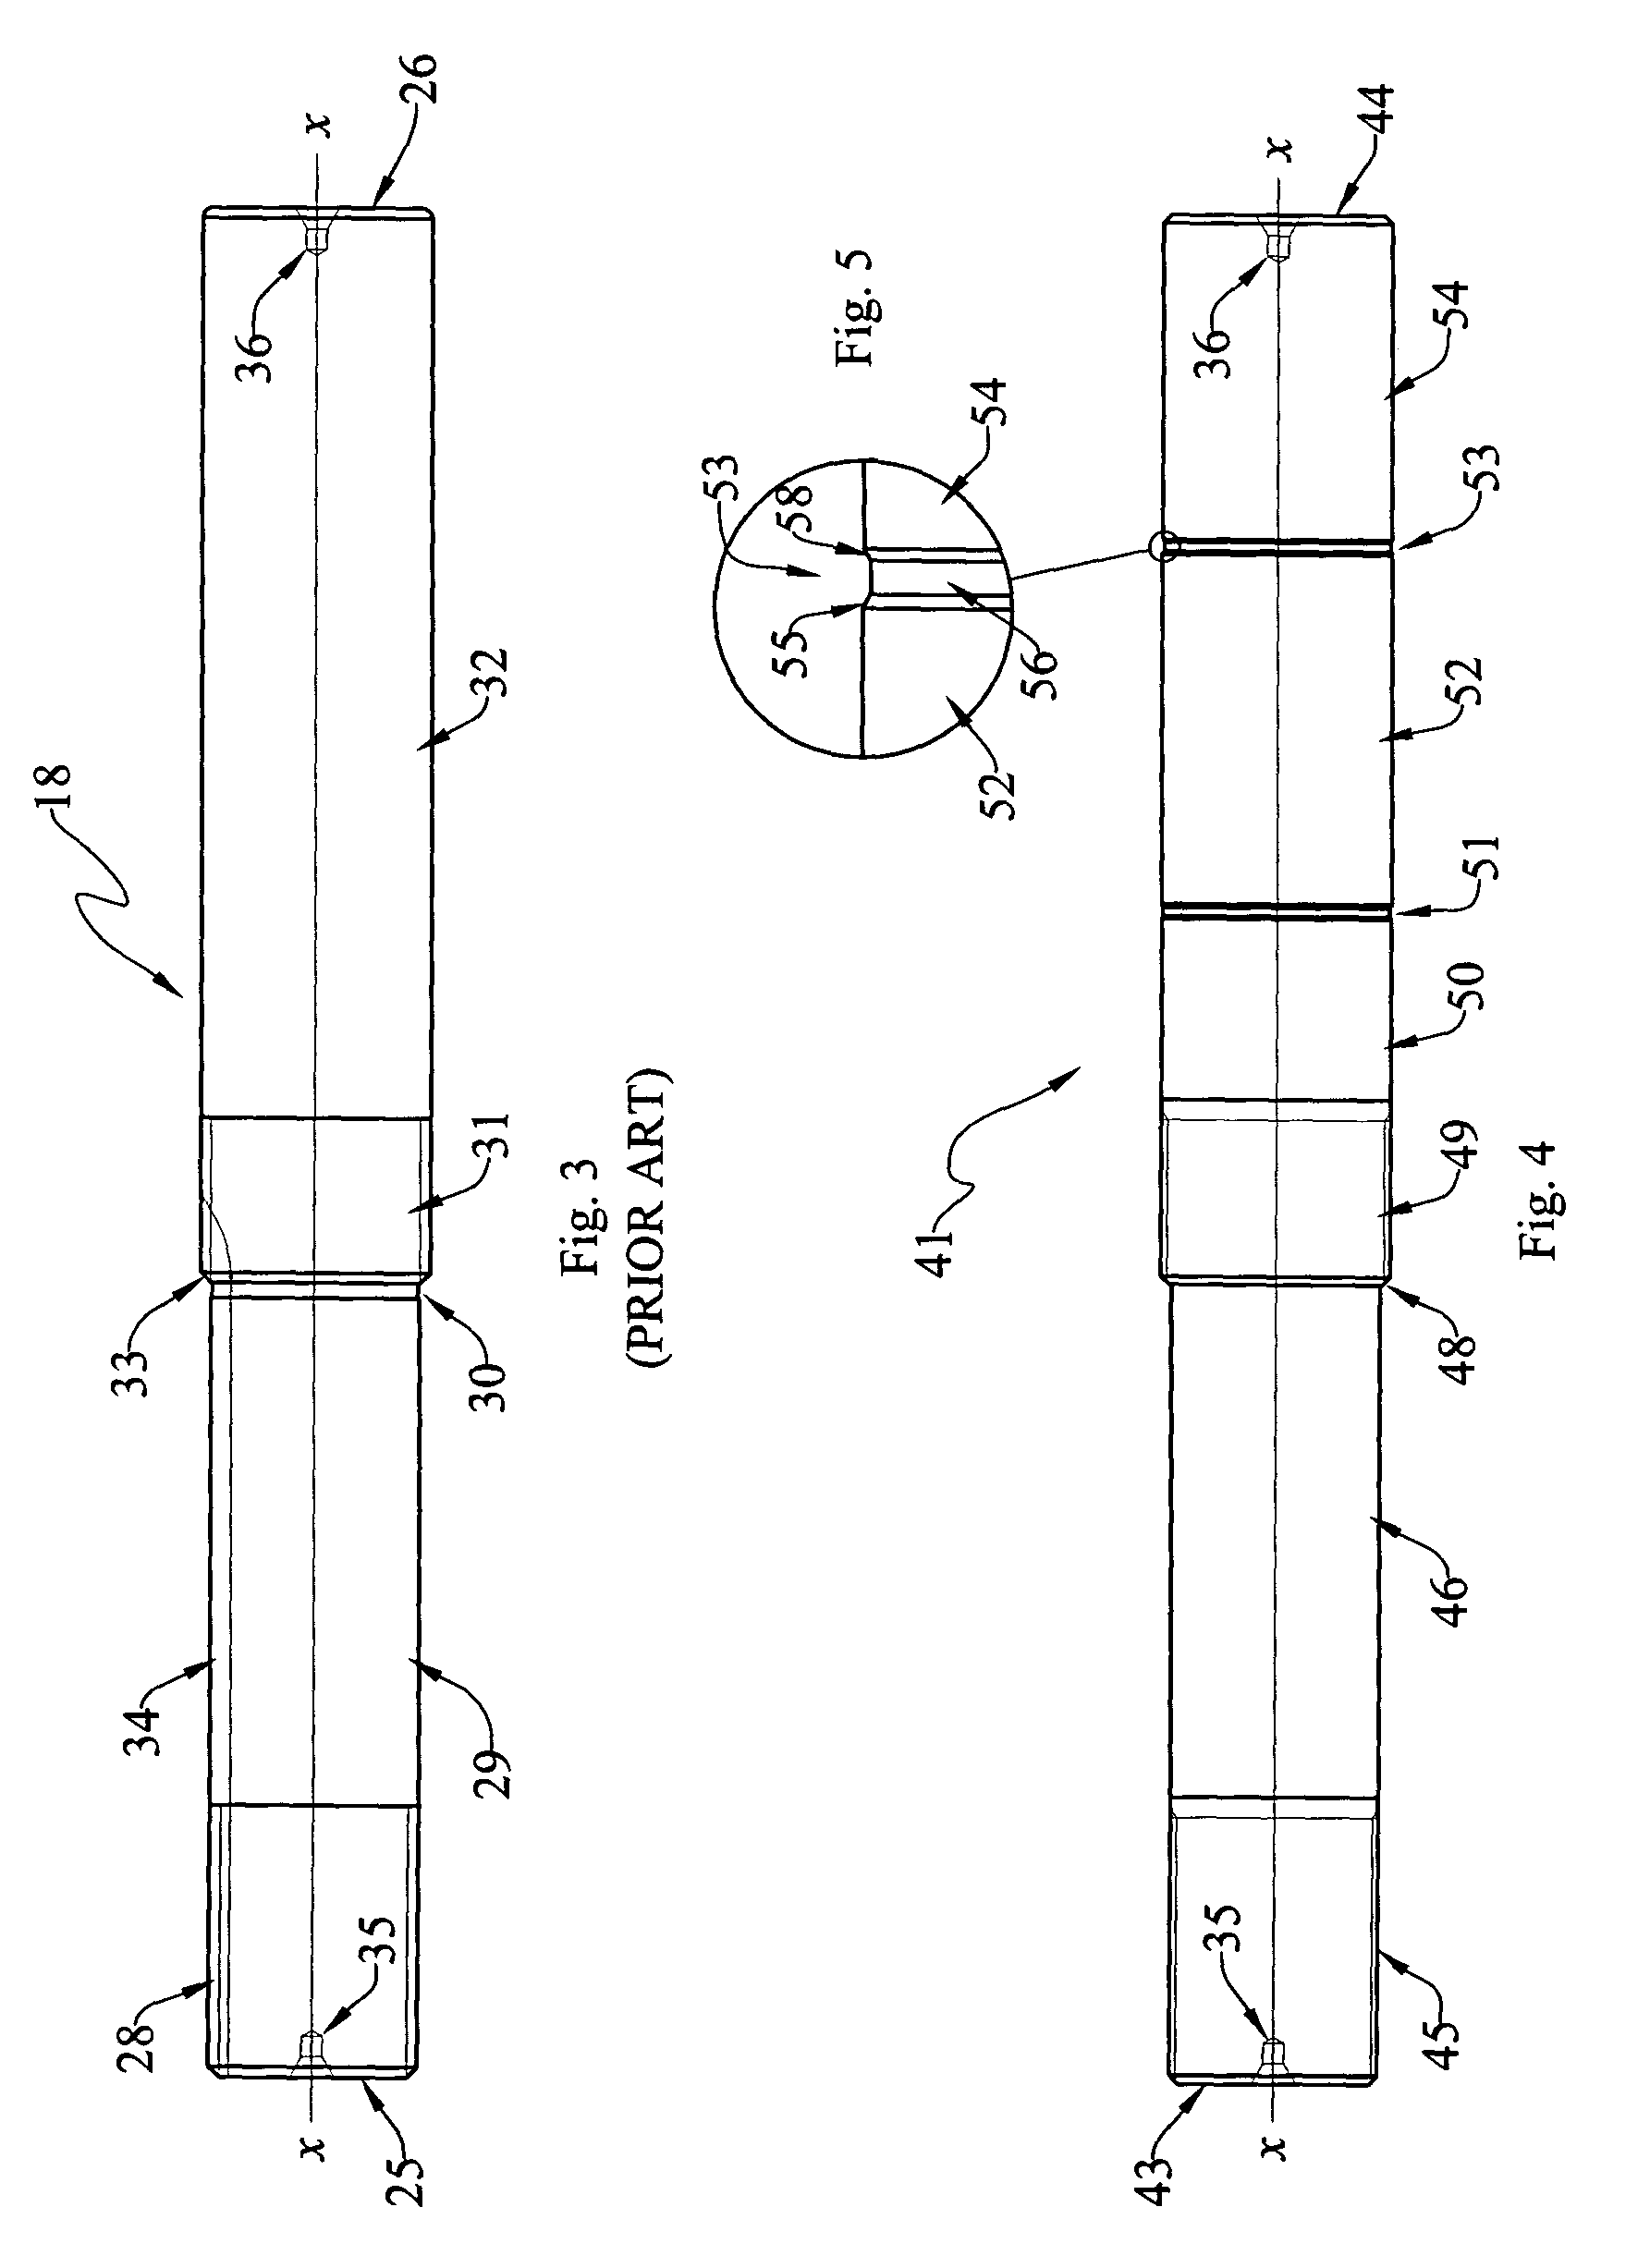 Multi-spindle screw machine, and improved tool arm for use therein